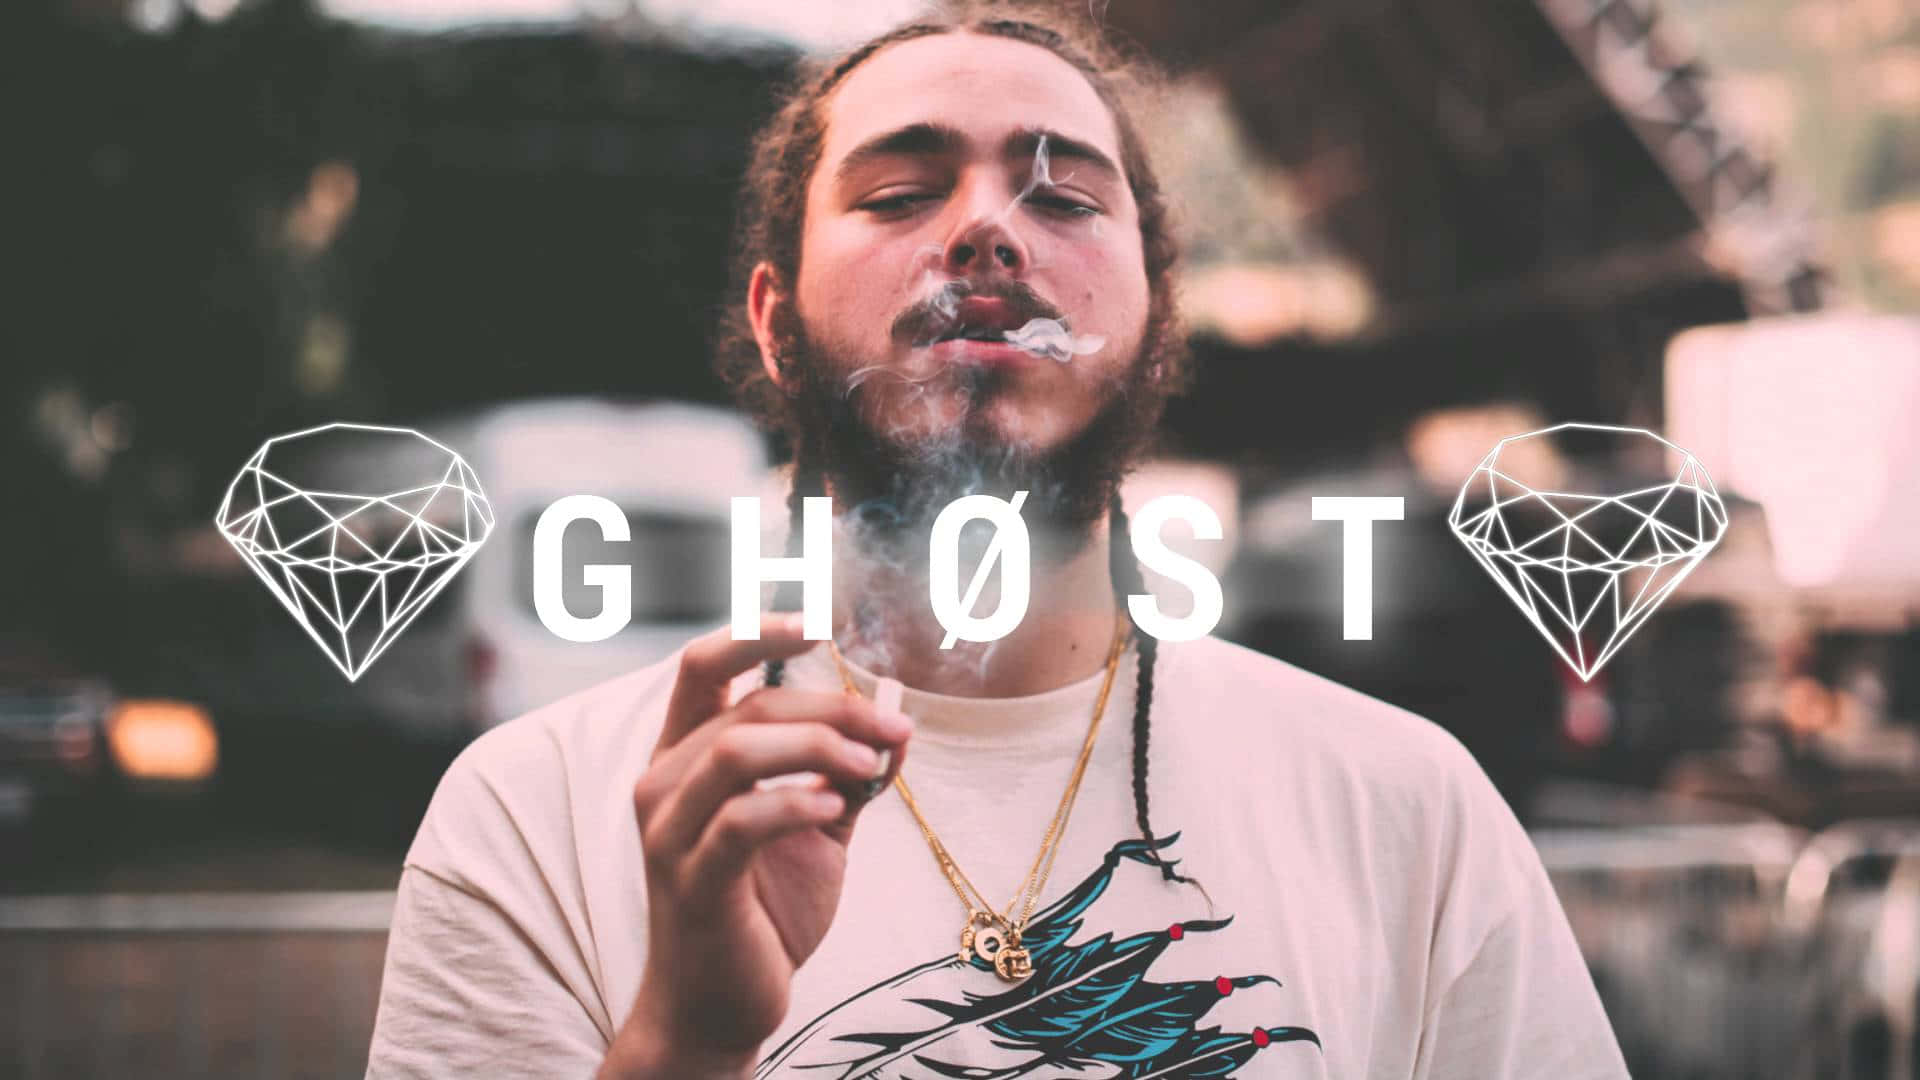 Get to Know Post Malone